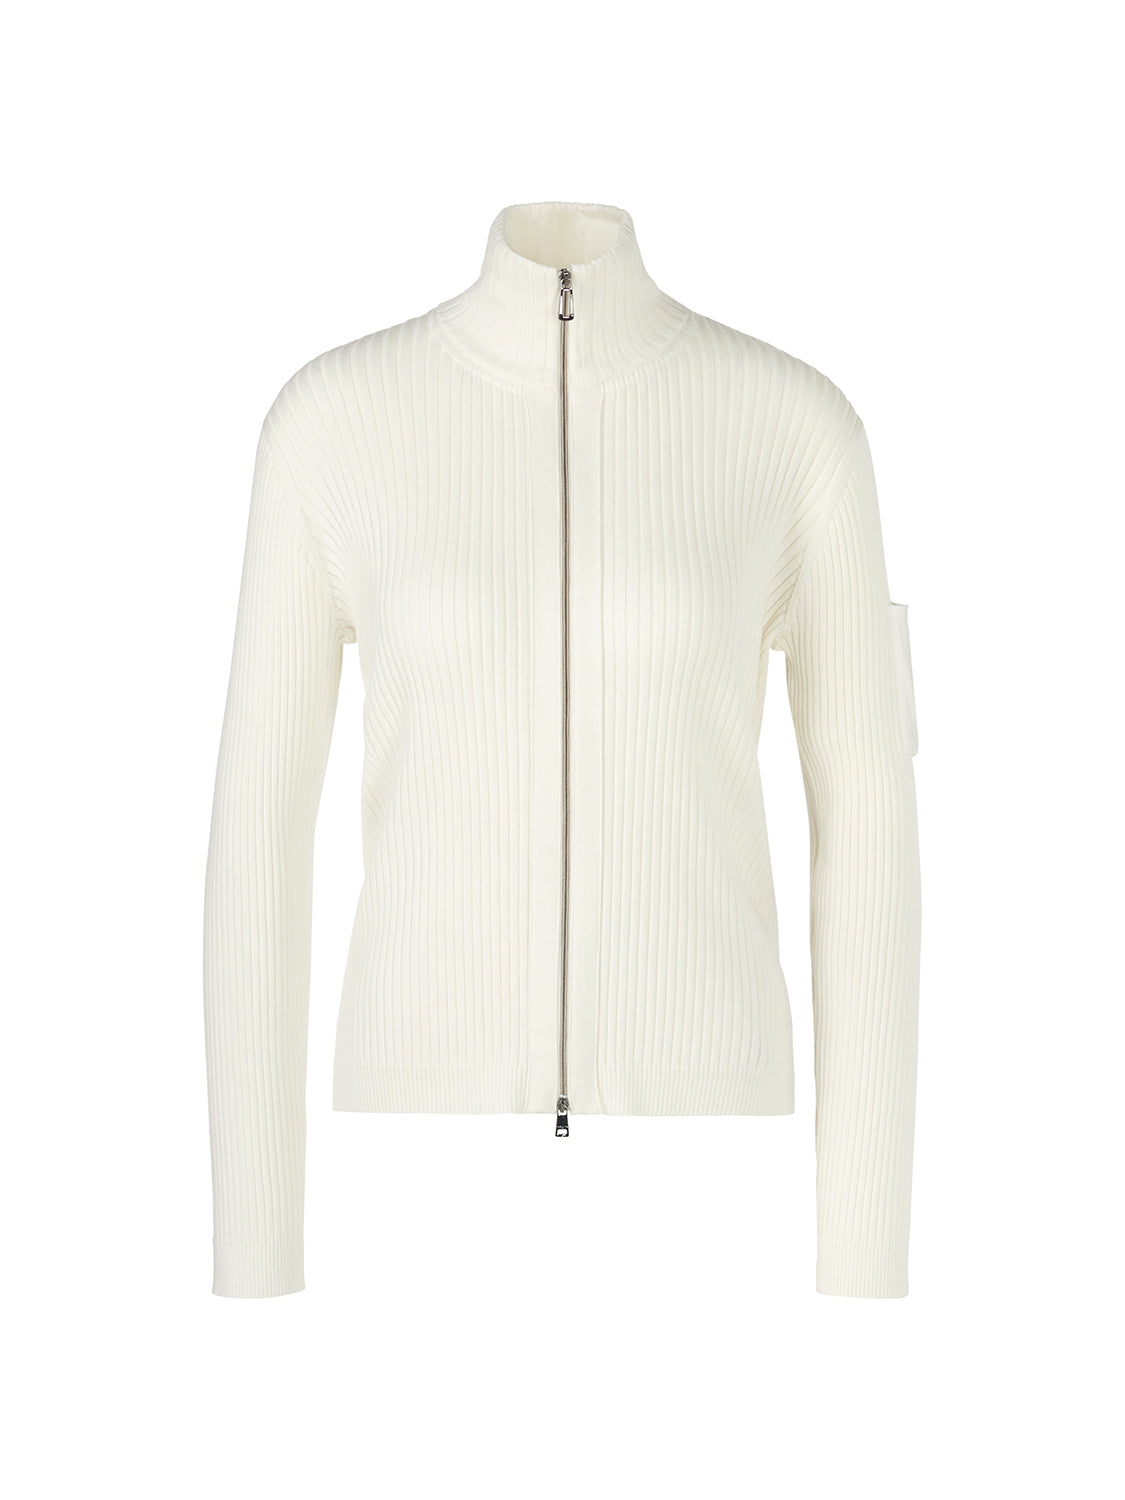 Marc Cain Fine Knit Cardigan With Zip WS 39.14 M61